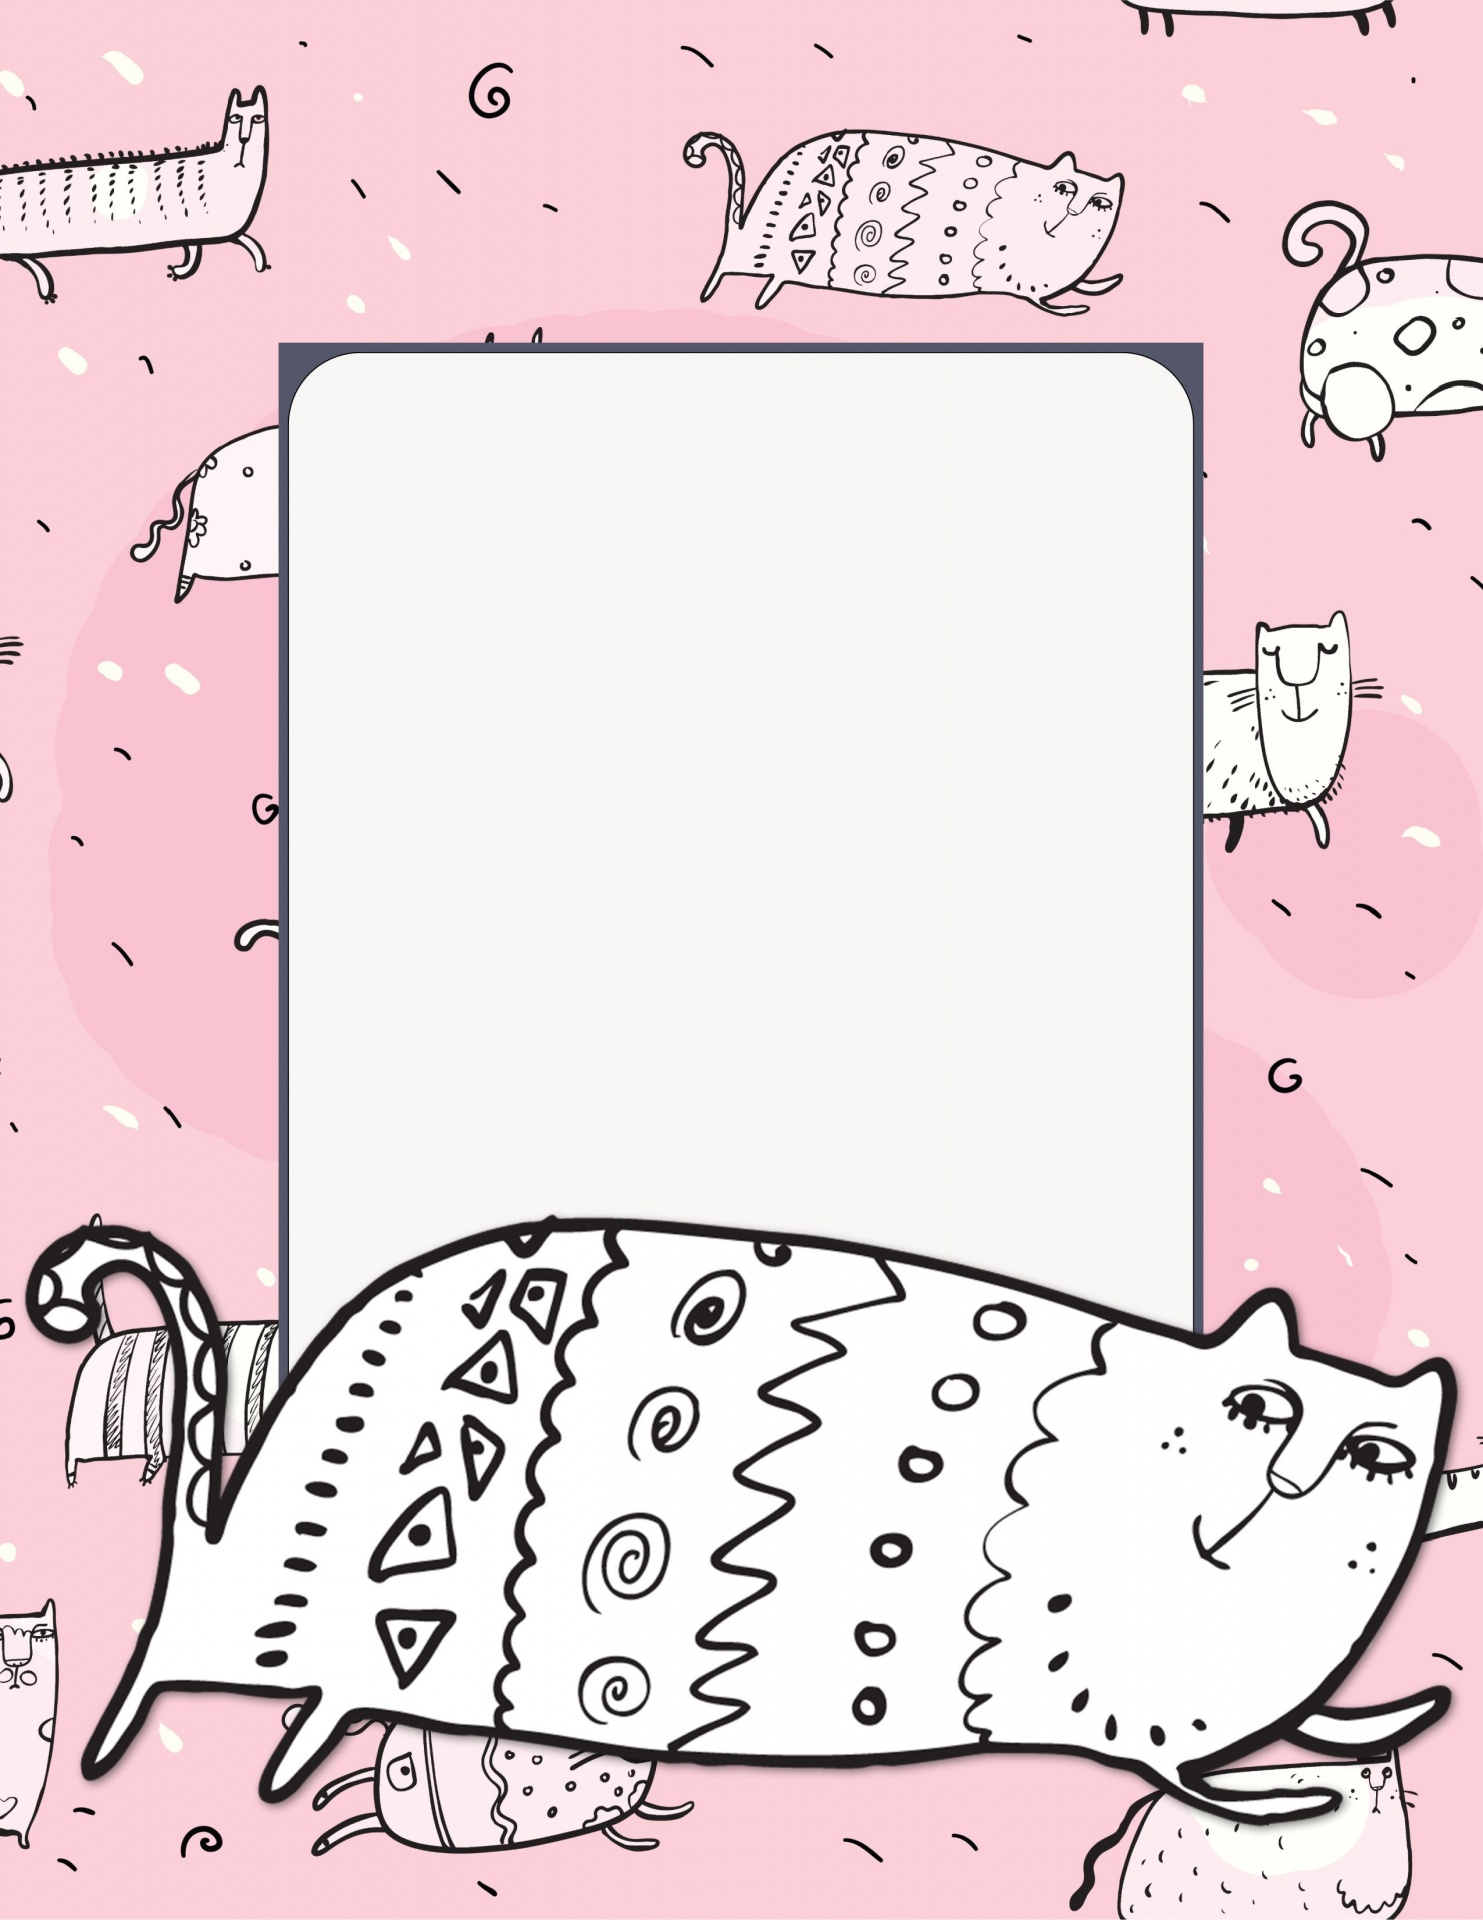 blank square for your message framed by cartoon cats with a cute cat cartoon cross the bottom